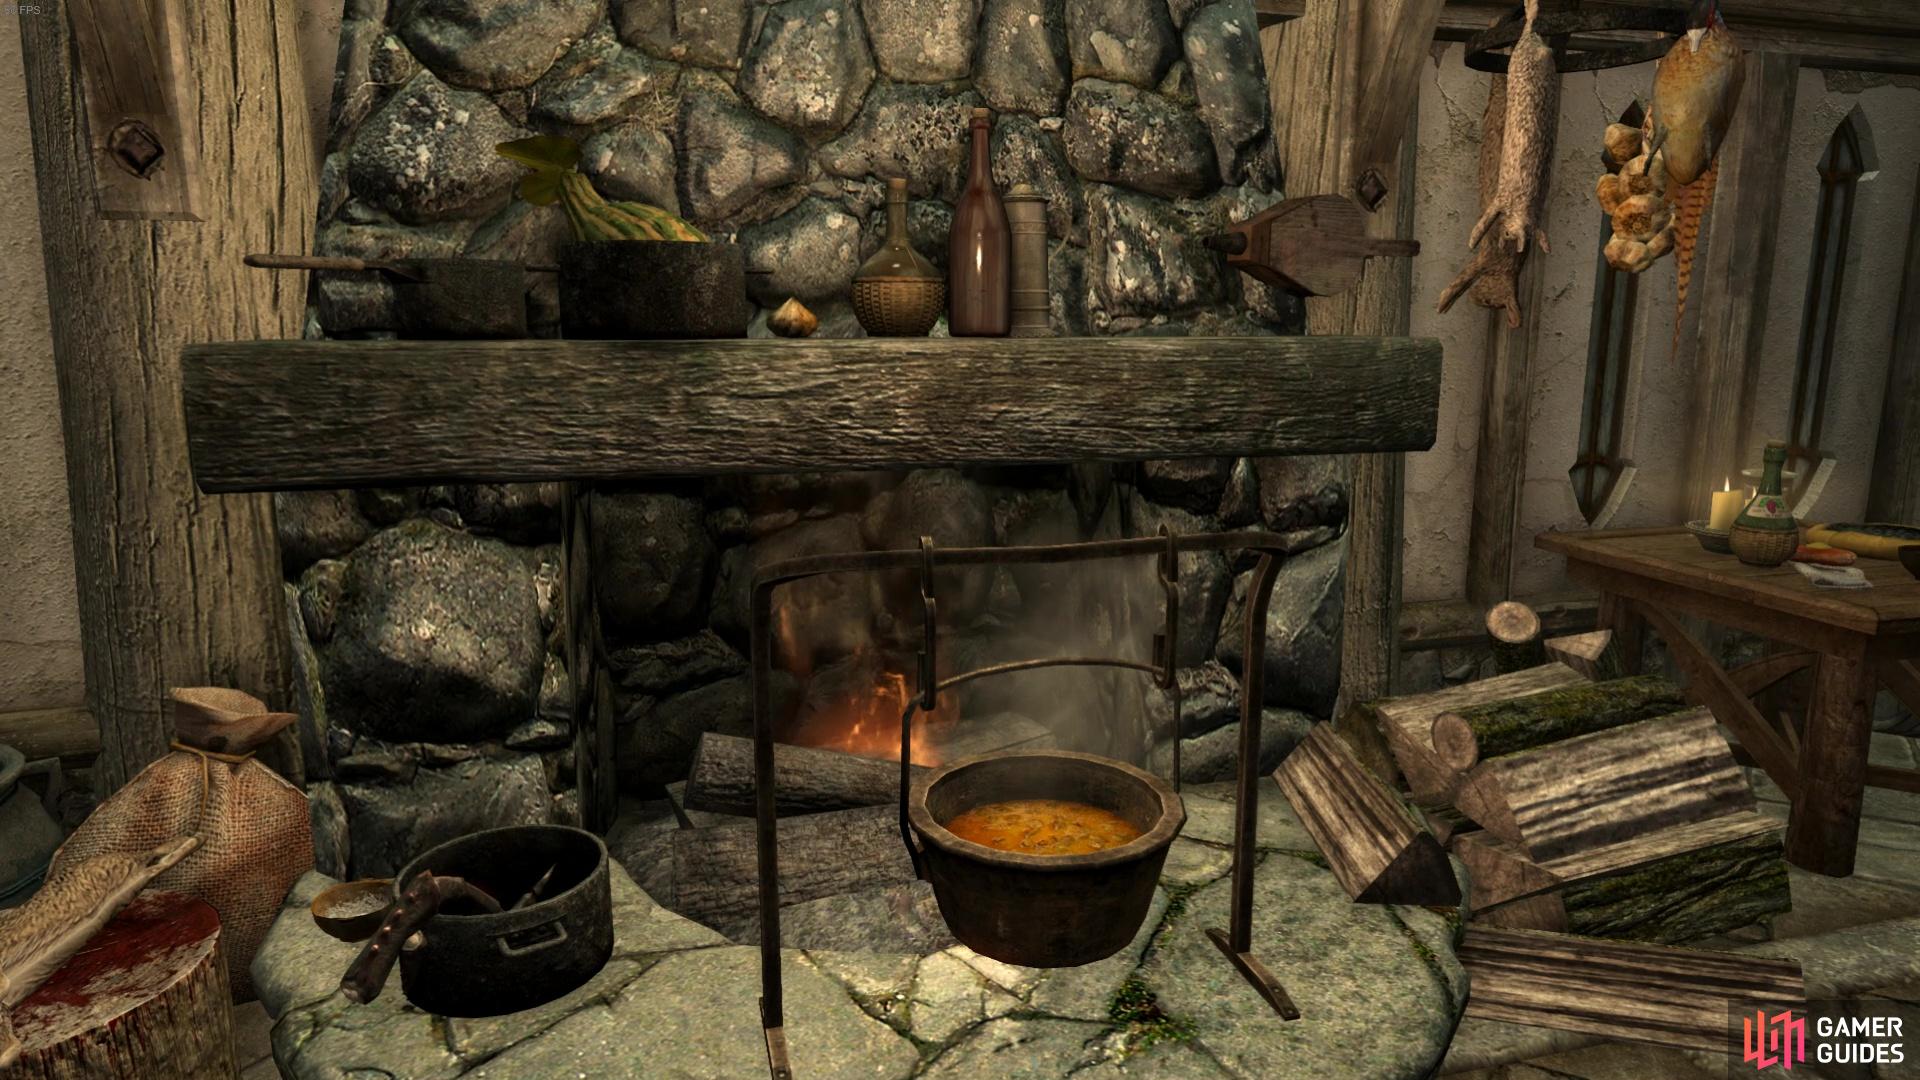 There's a fireplace with a cooking pot ready to cook up some nice meals!